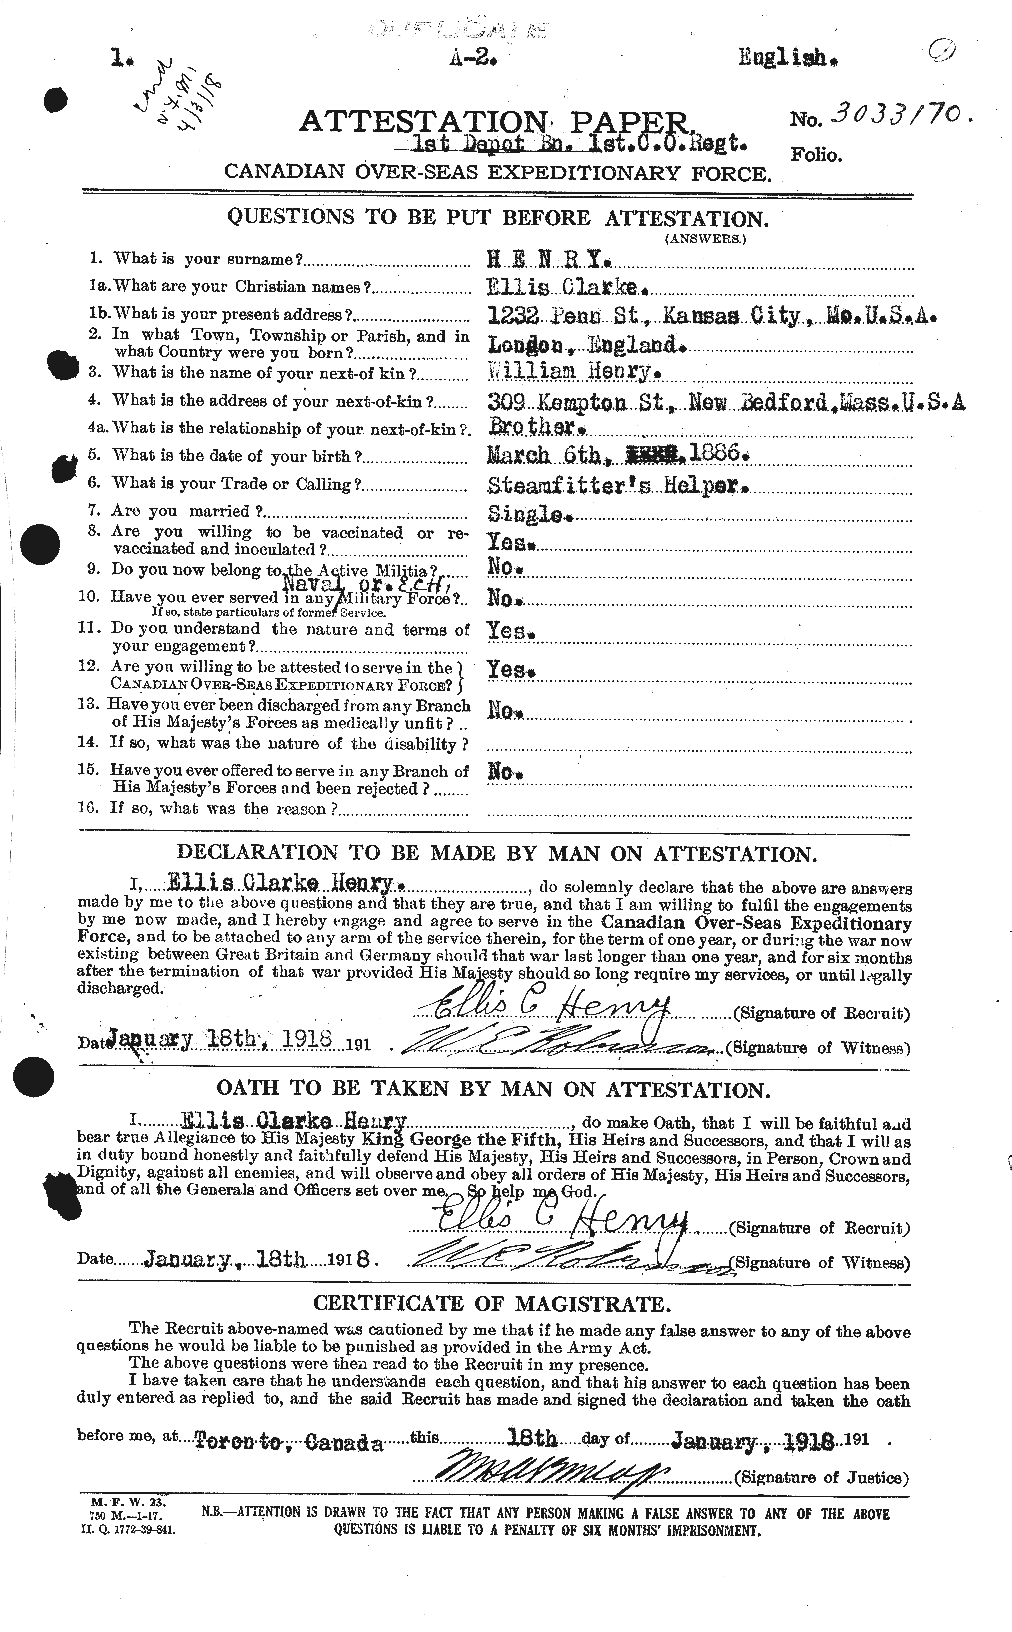 Personnel Records of the First World War - CEF 392844a